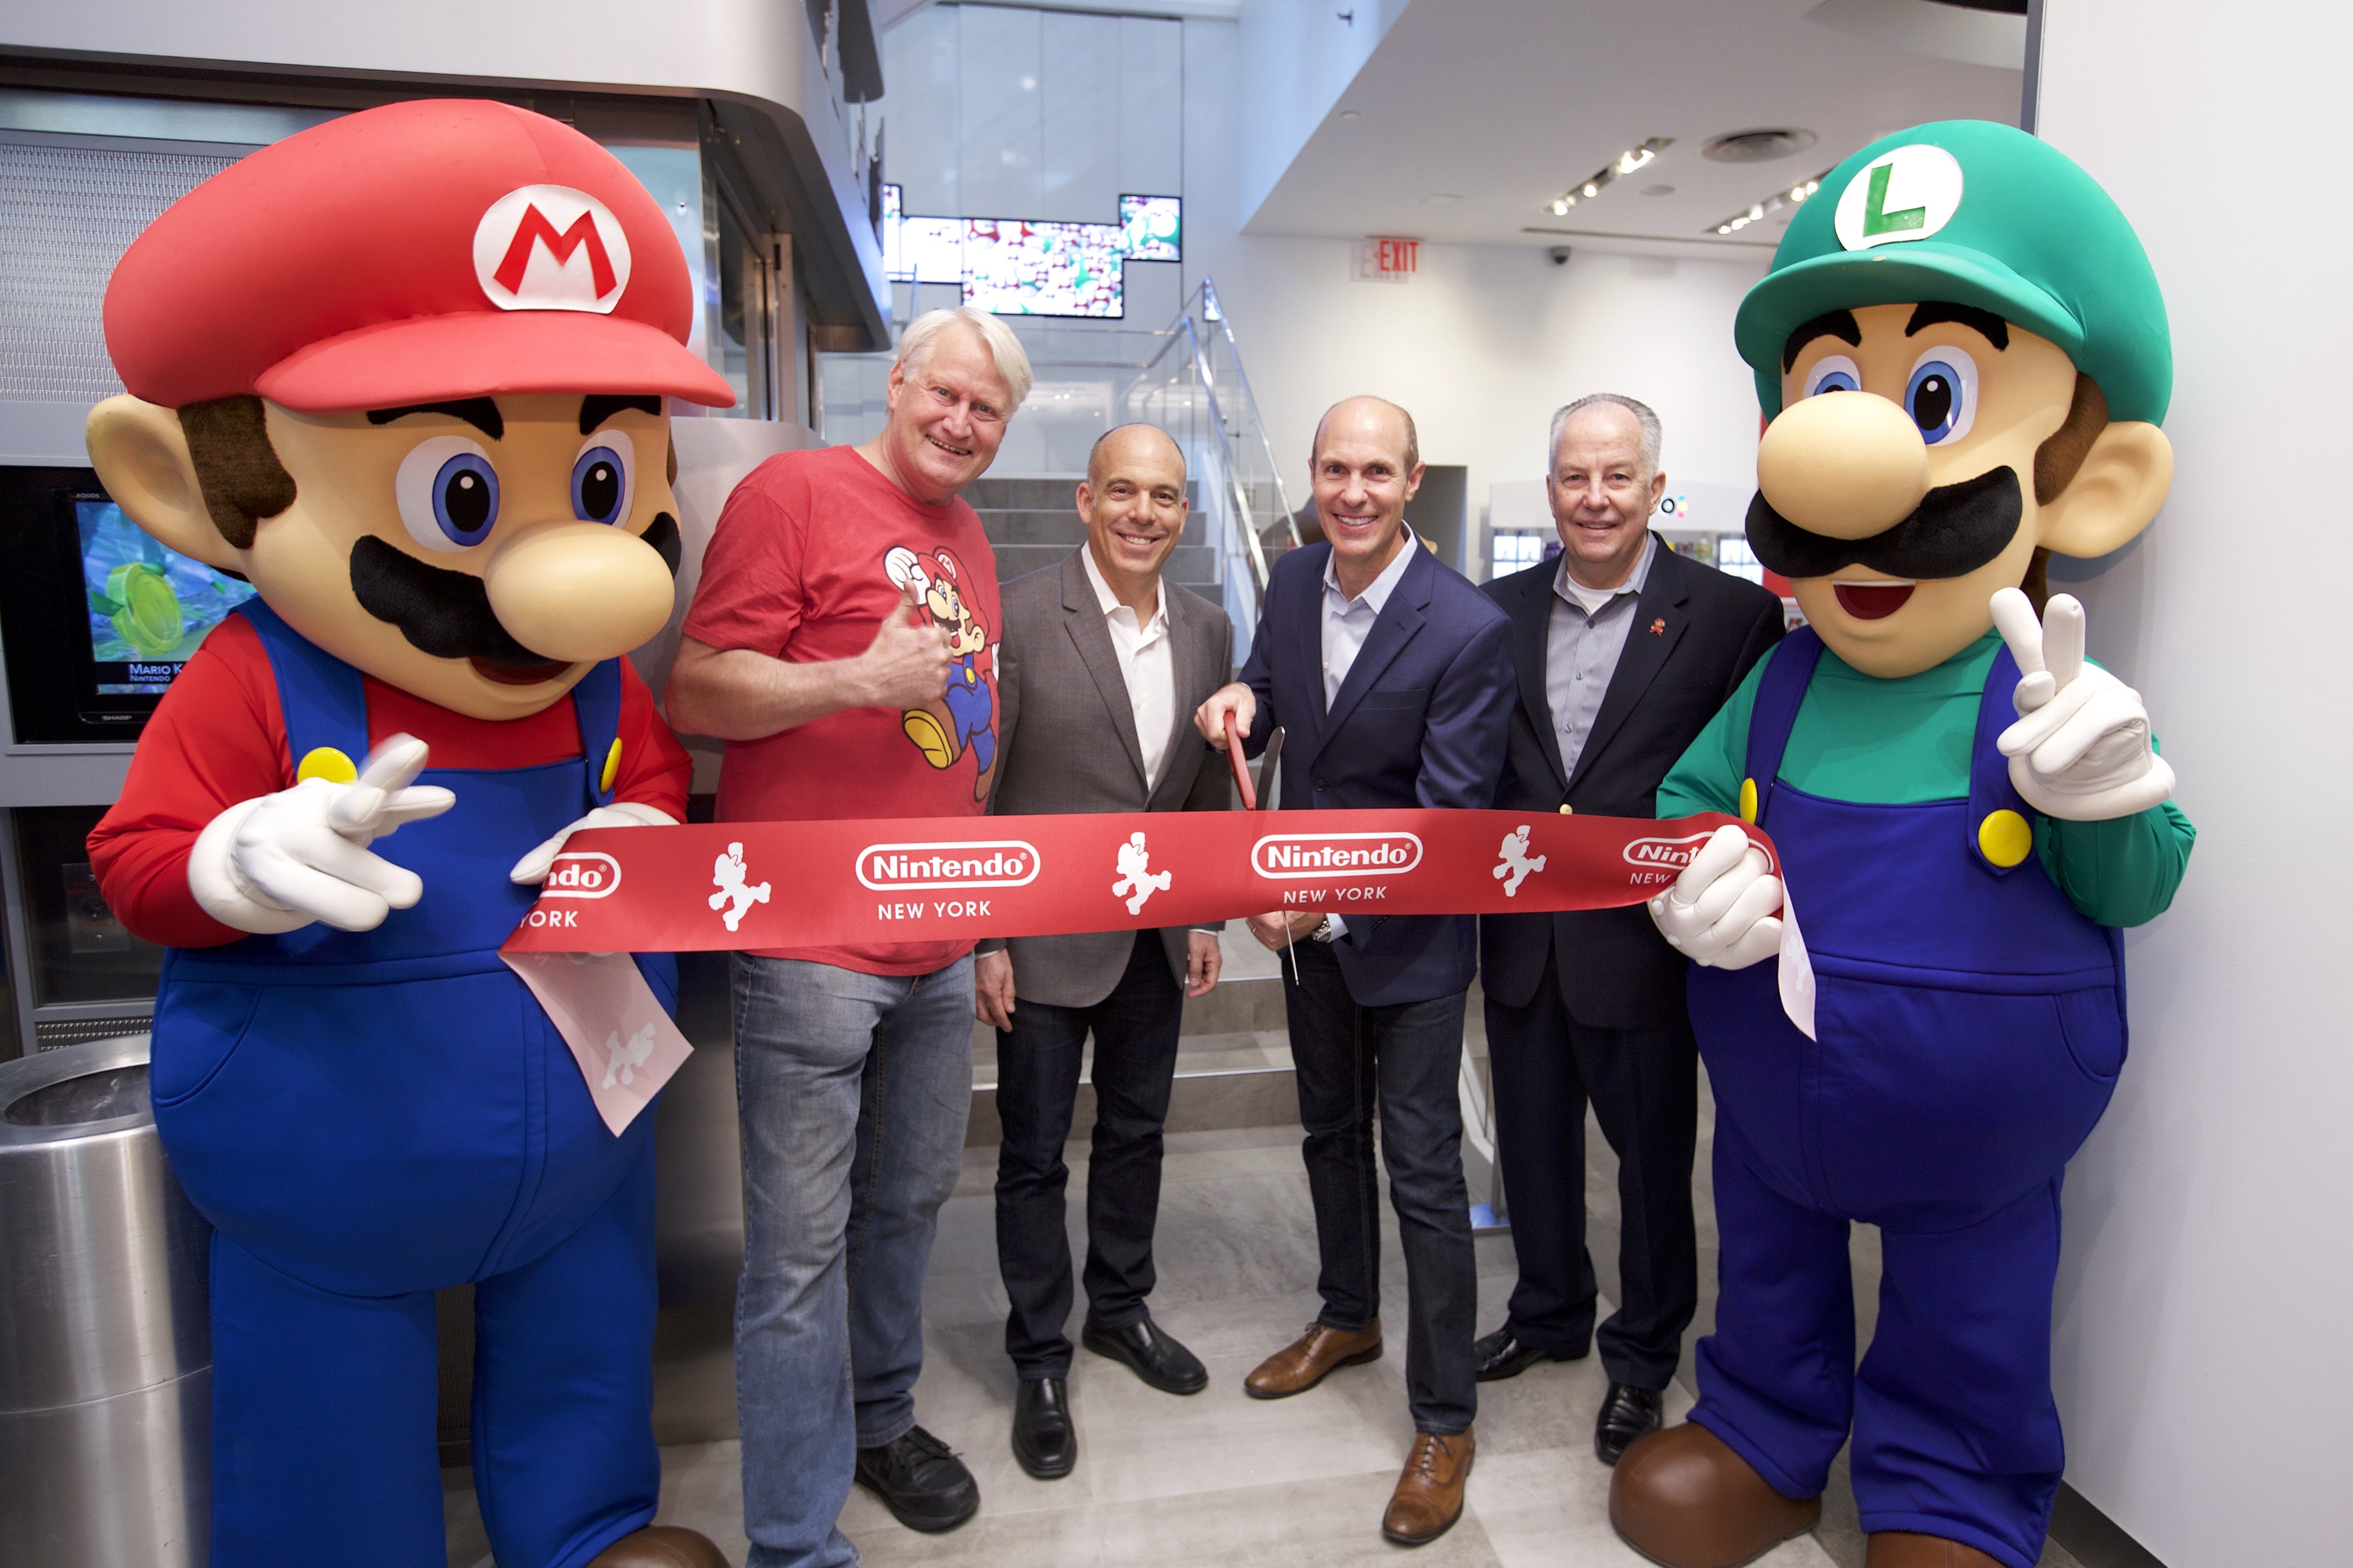 In this photo provided by Nintendo of America, Mario and Luigi unveil the remodeled Nintendo NY store during a ribbon-cutting ceremony on 19th February 2016. Joining the Super Mario Bros. (left to right) are Charles Martinet, the voice of Mario, and Nintendo of America executives Doug Bowser, Vice President of Sales; Scott Moffitt, Executive Vice President of Sales & Marketing; and Rick Lessley, Vice President of the Supply Chain Group.​